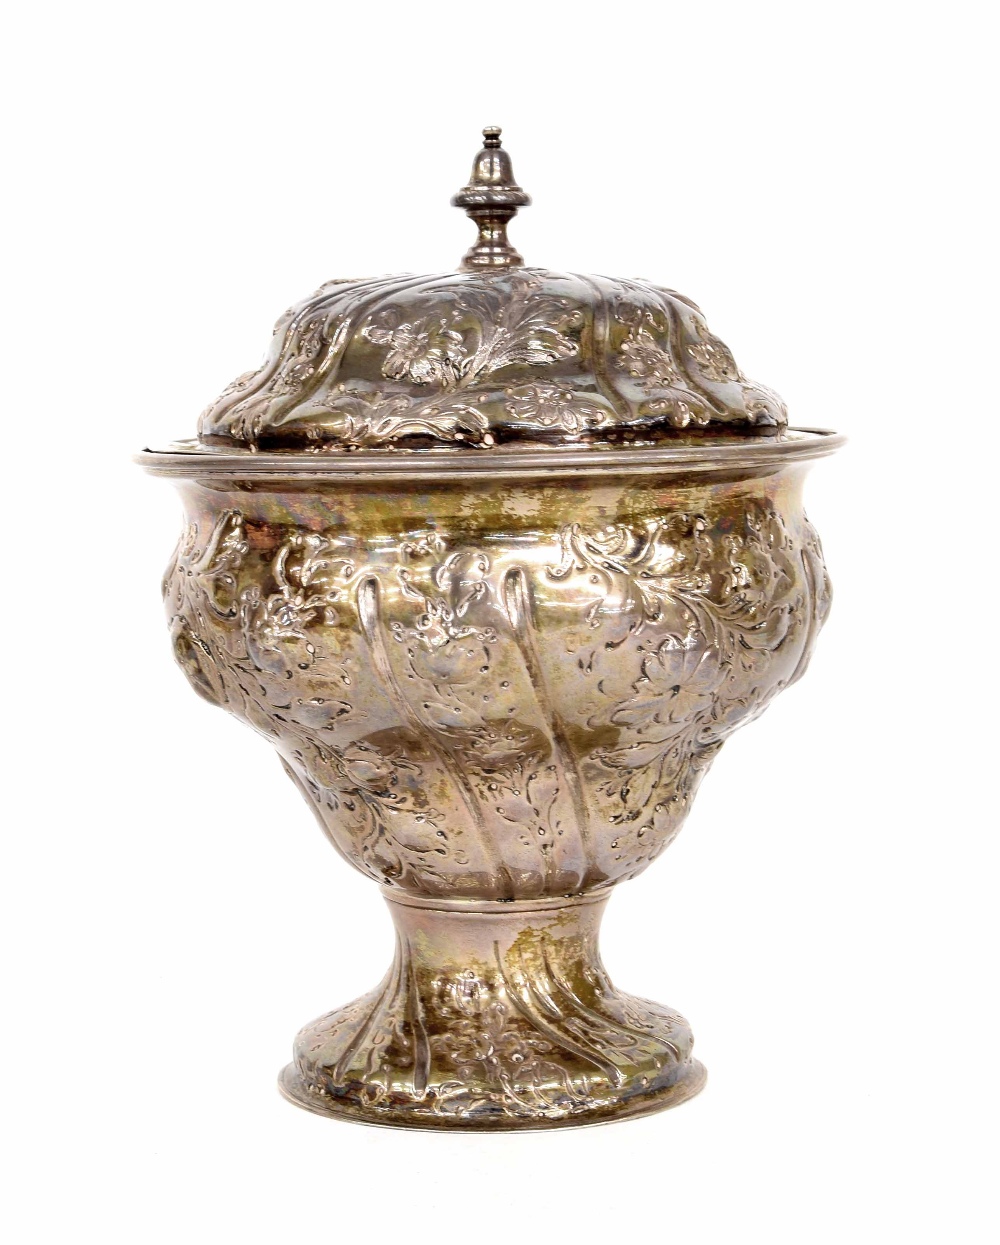 18th century silver lidded repousse sucrier, gilded interior, maker 'ID', London 1773, 6" high, 4.